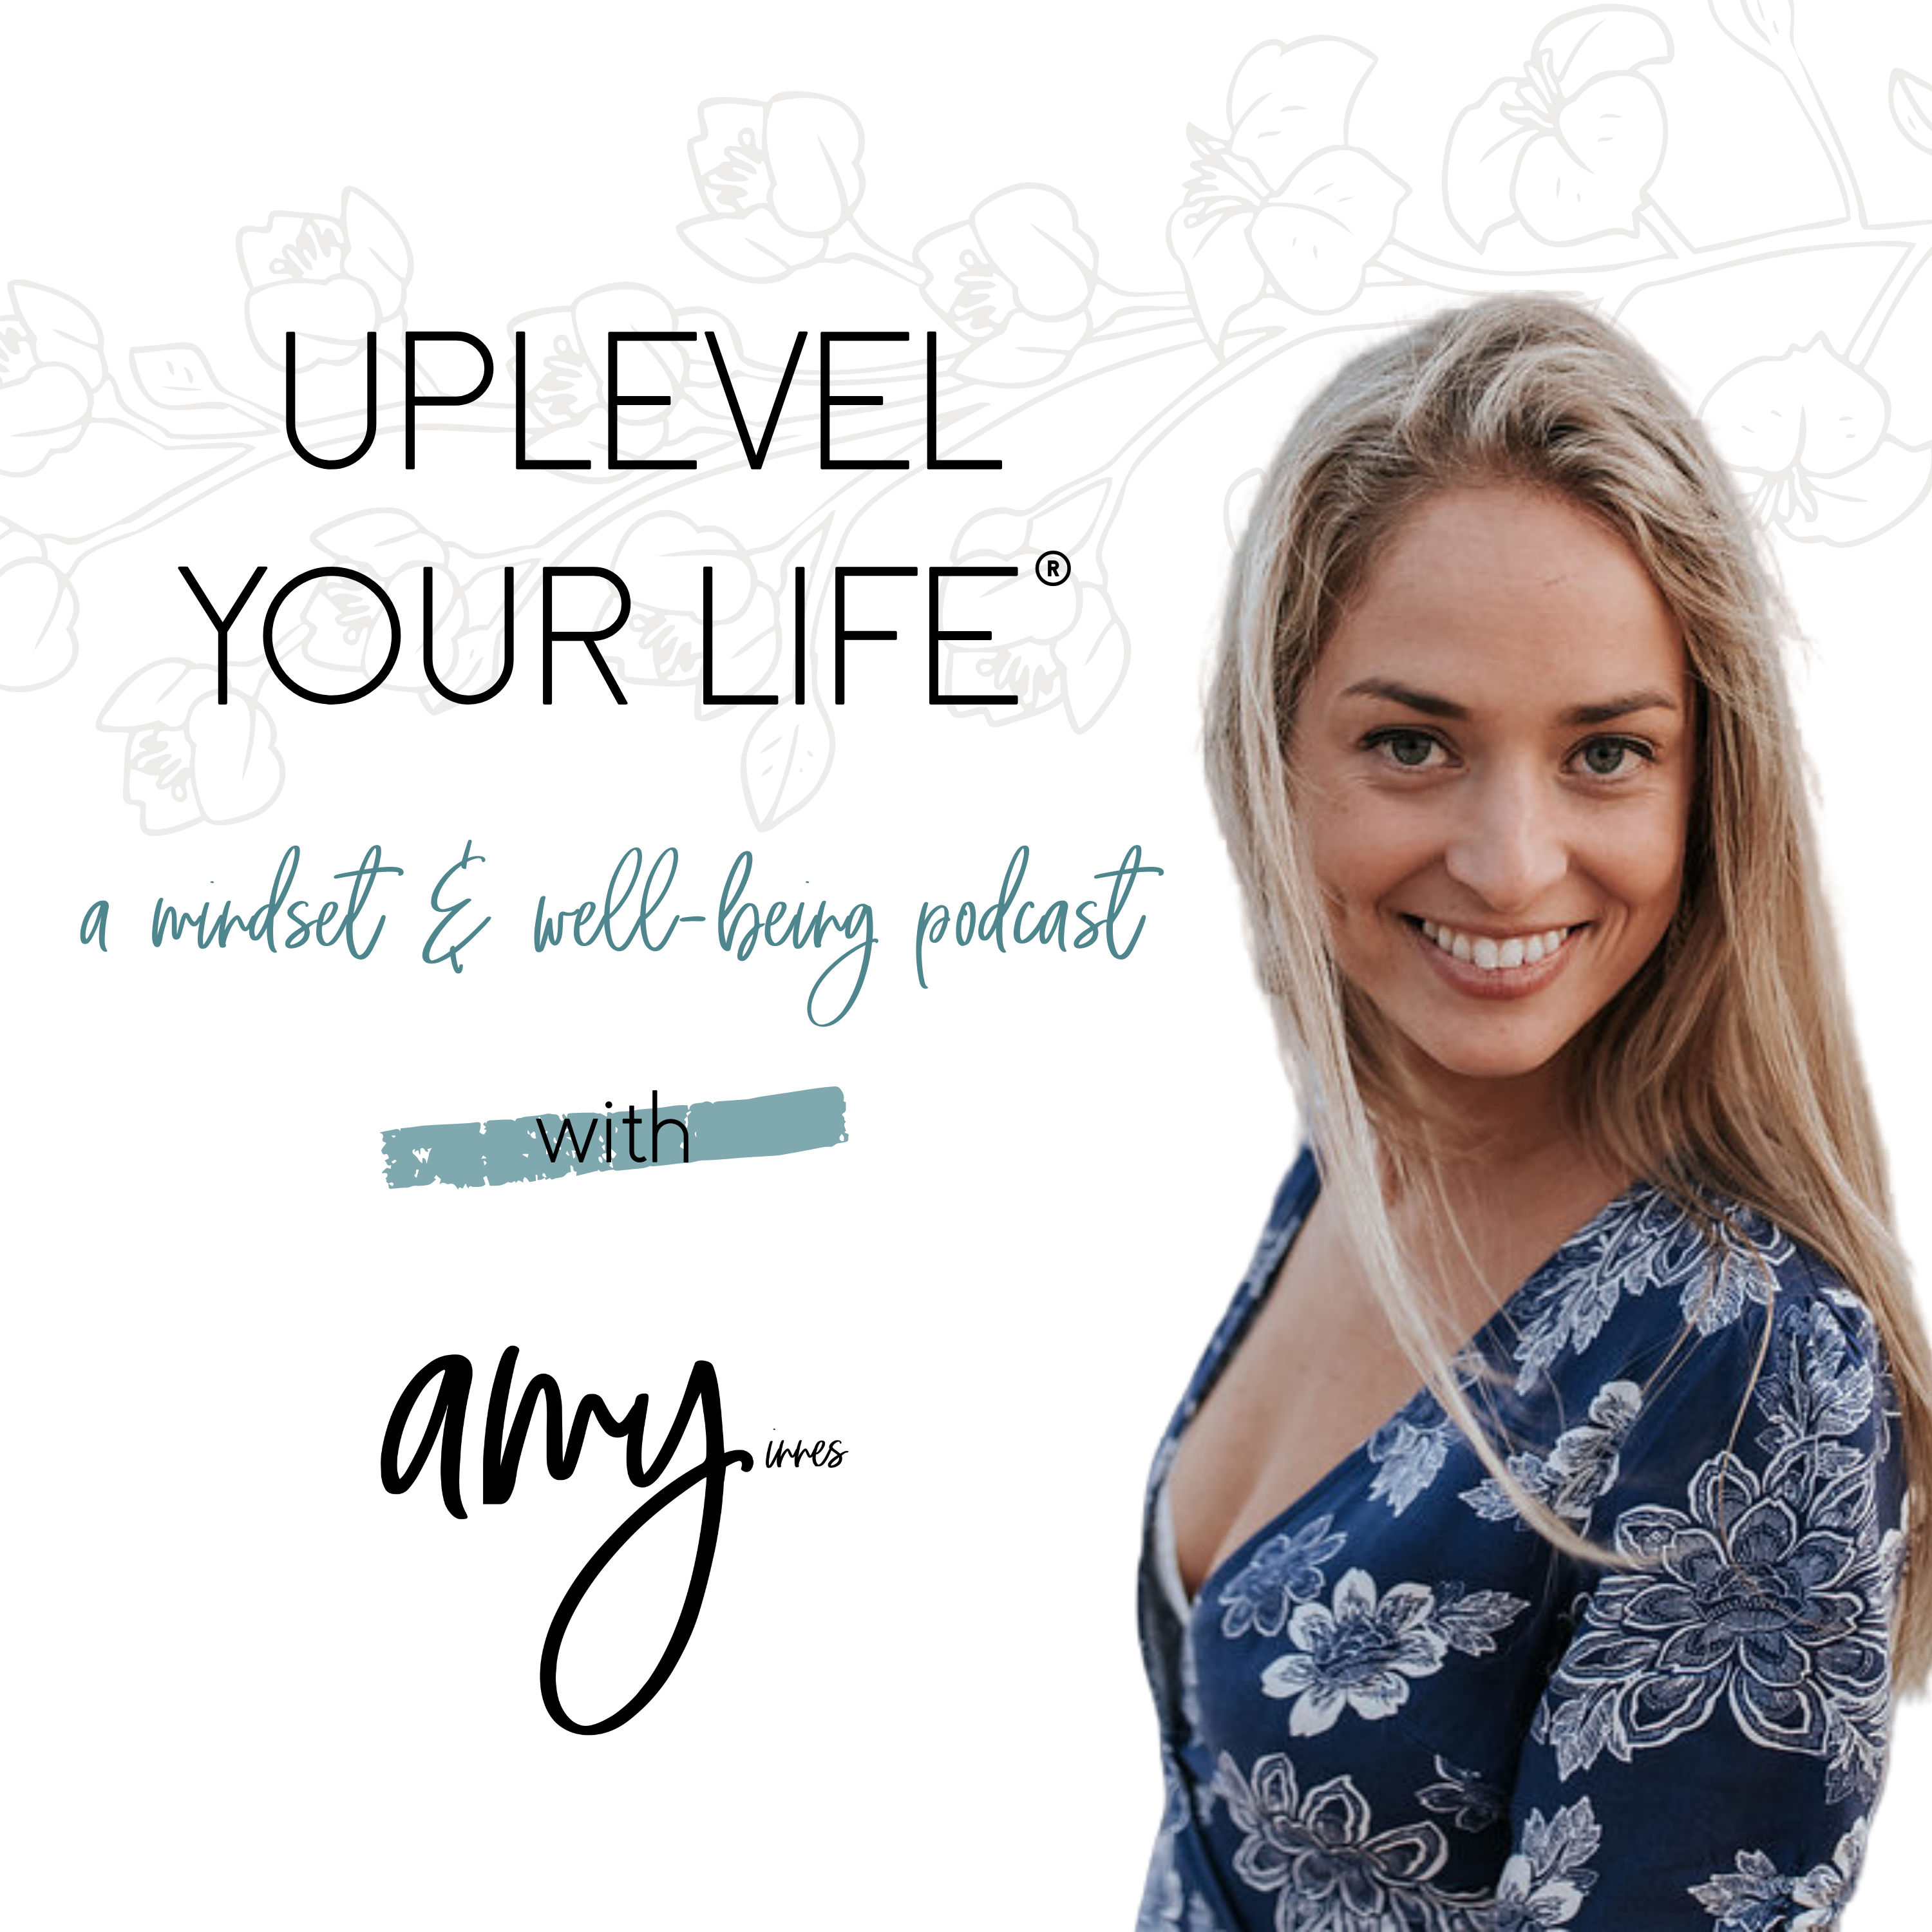 Episode 37: Kelly Gallo - Pushing through your shadows to uplevel your life